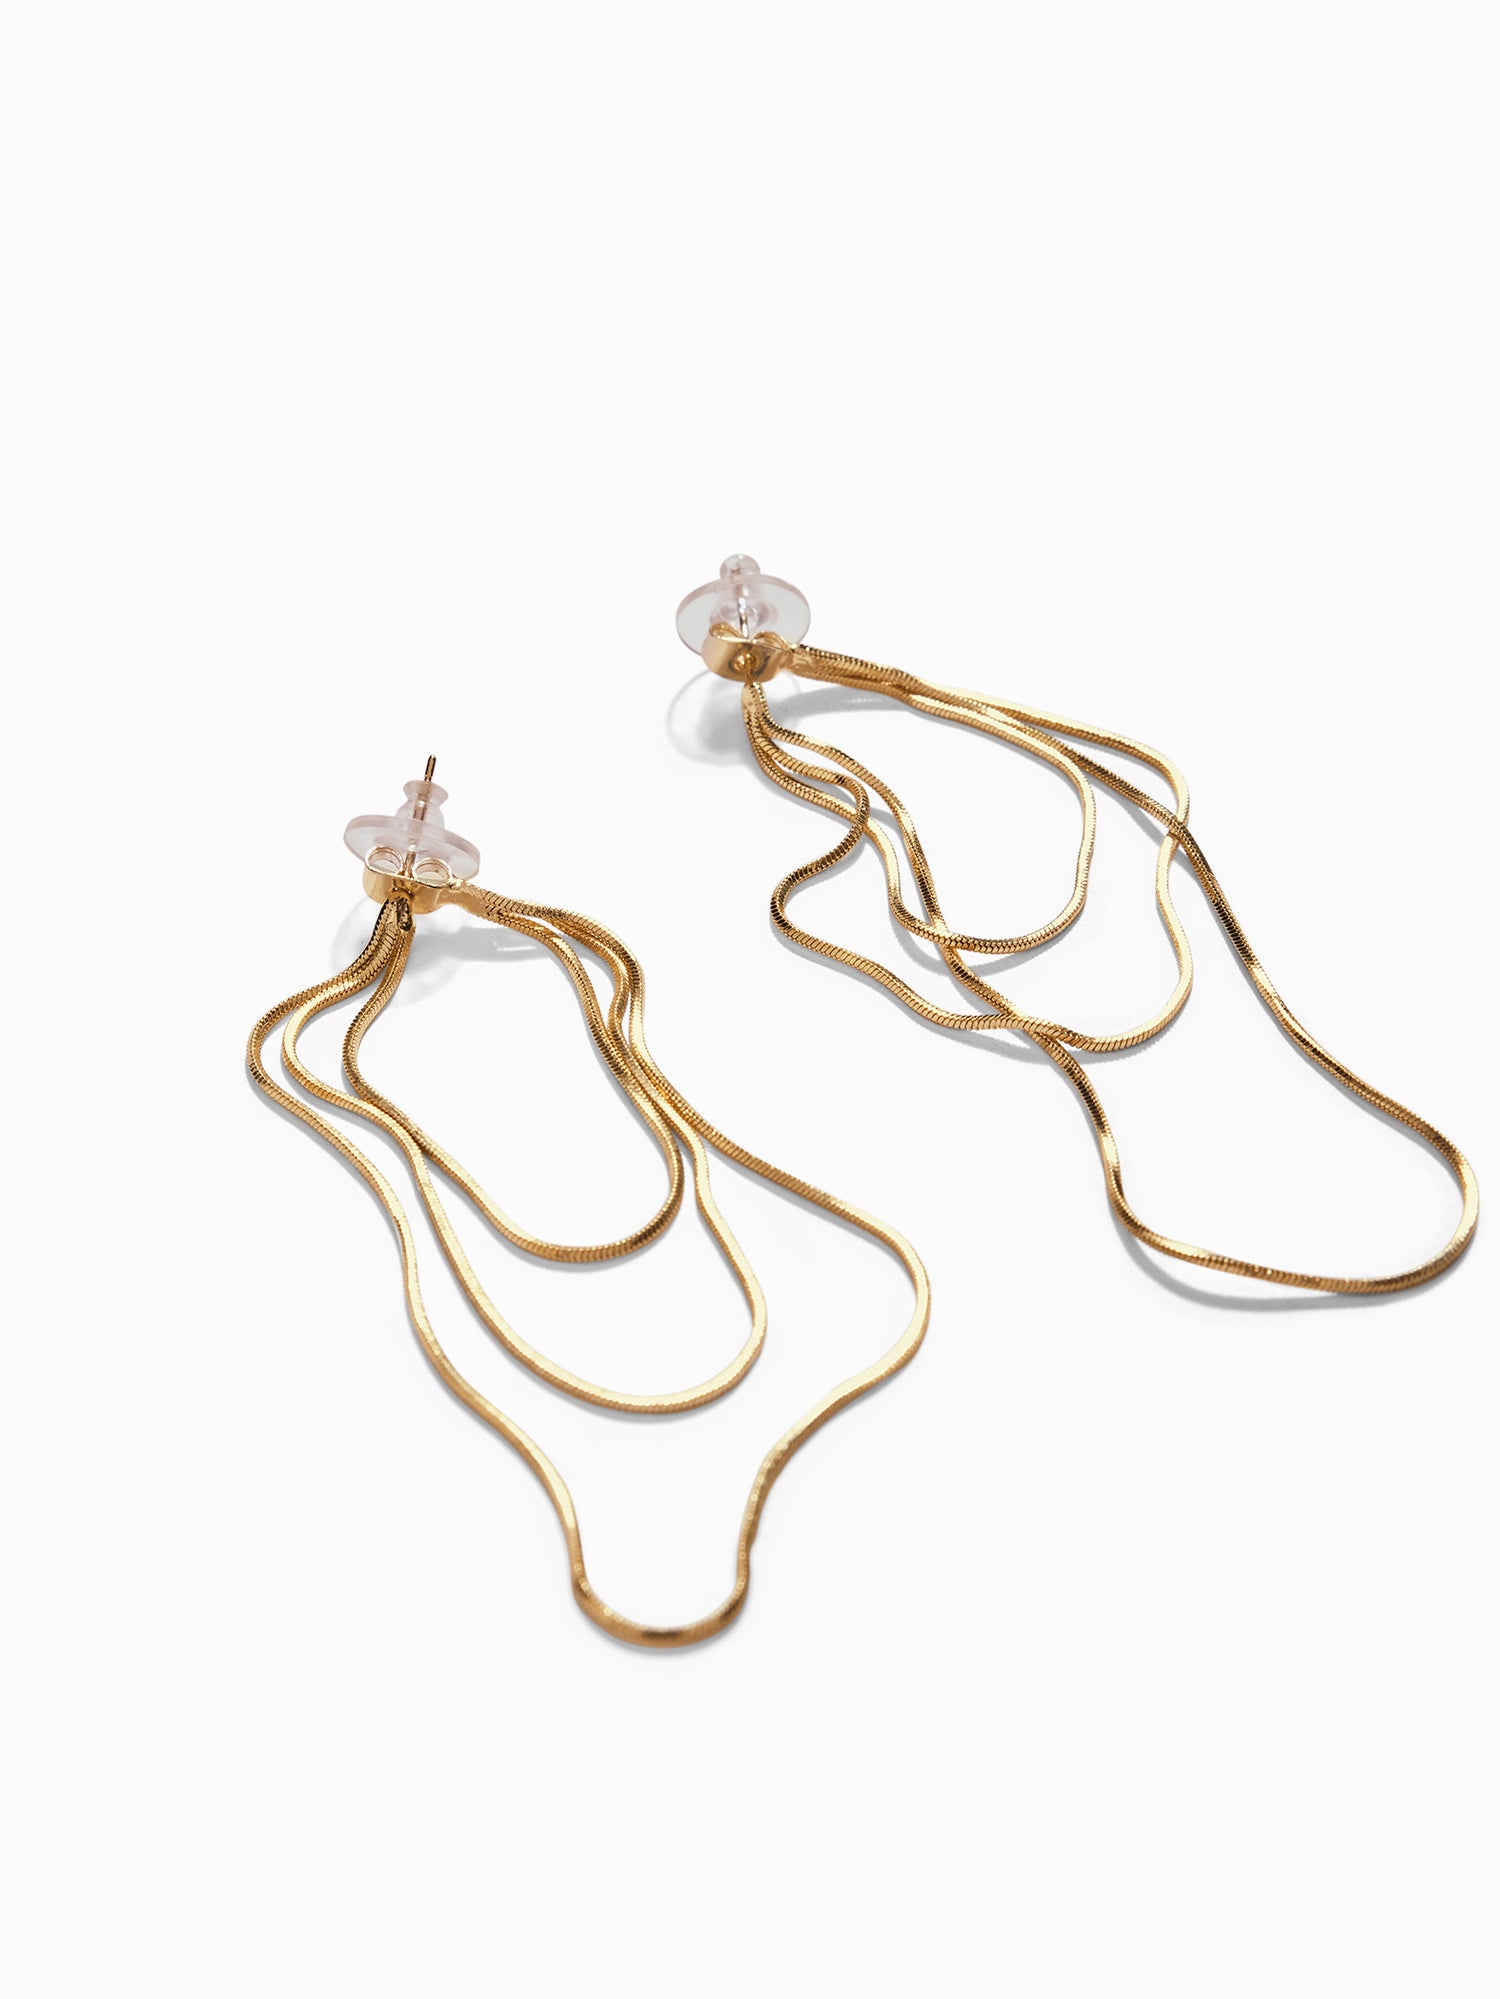 Gold Multilayered Chain Earrings